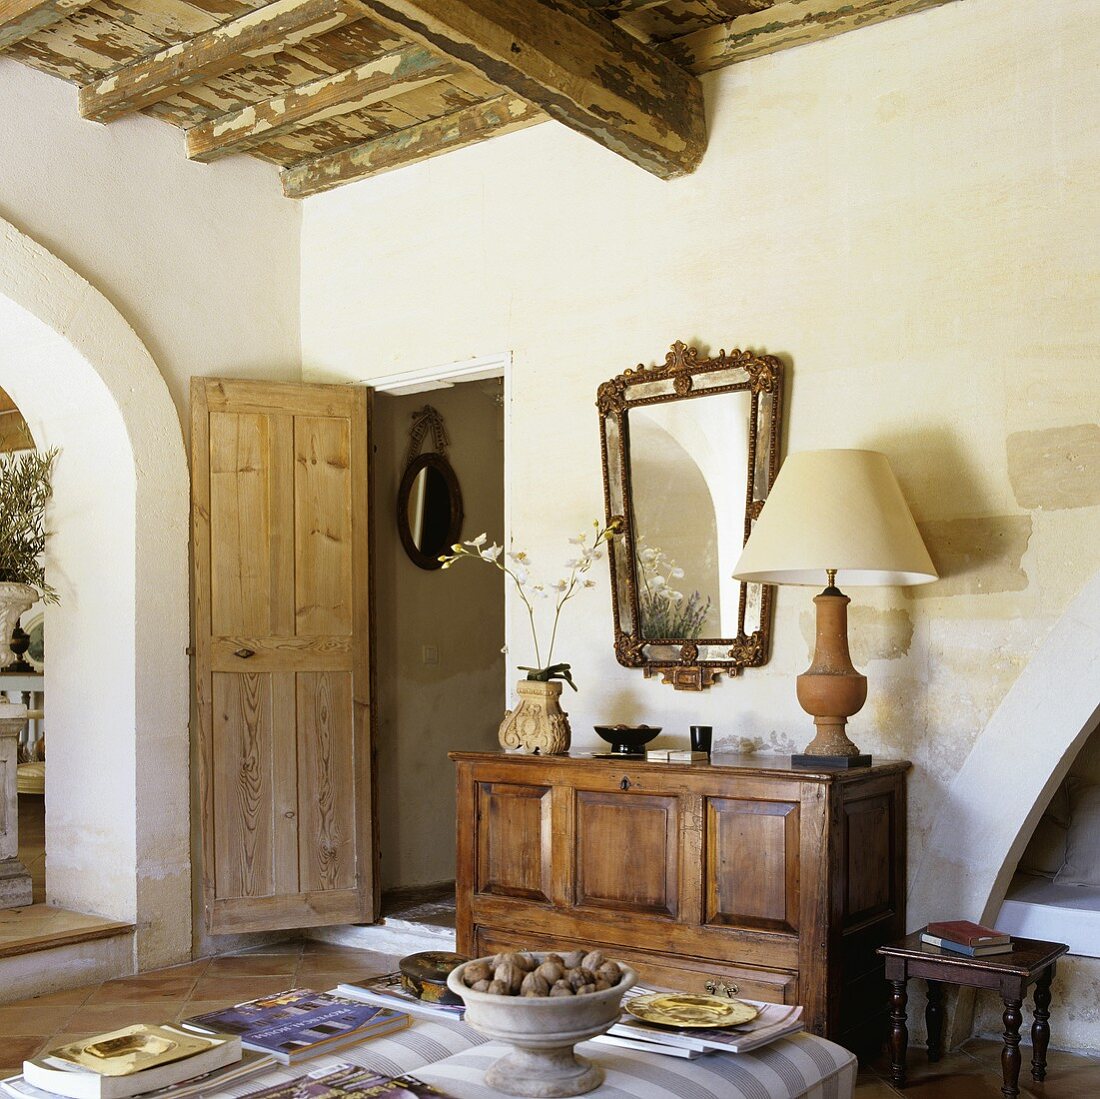 Living room in a Provencal style country home with rustic wooden ceiling and sideboard next to a wide open door